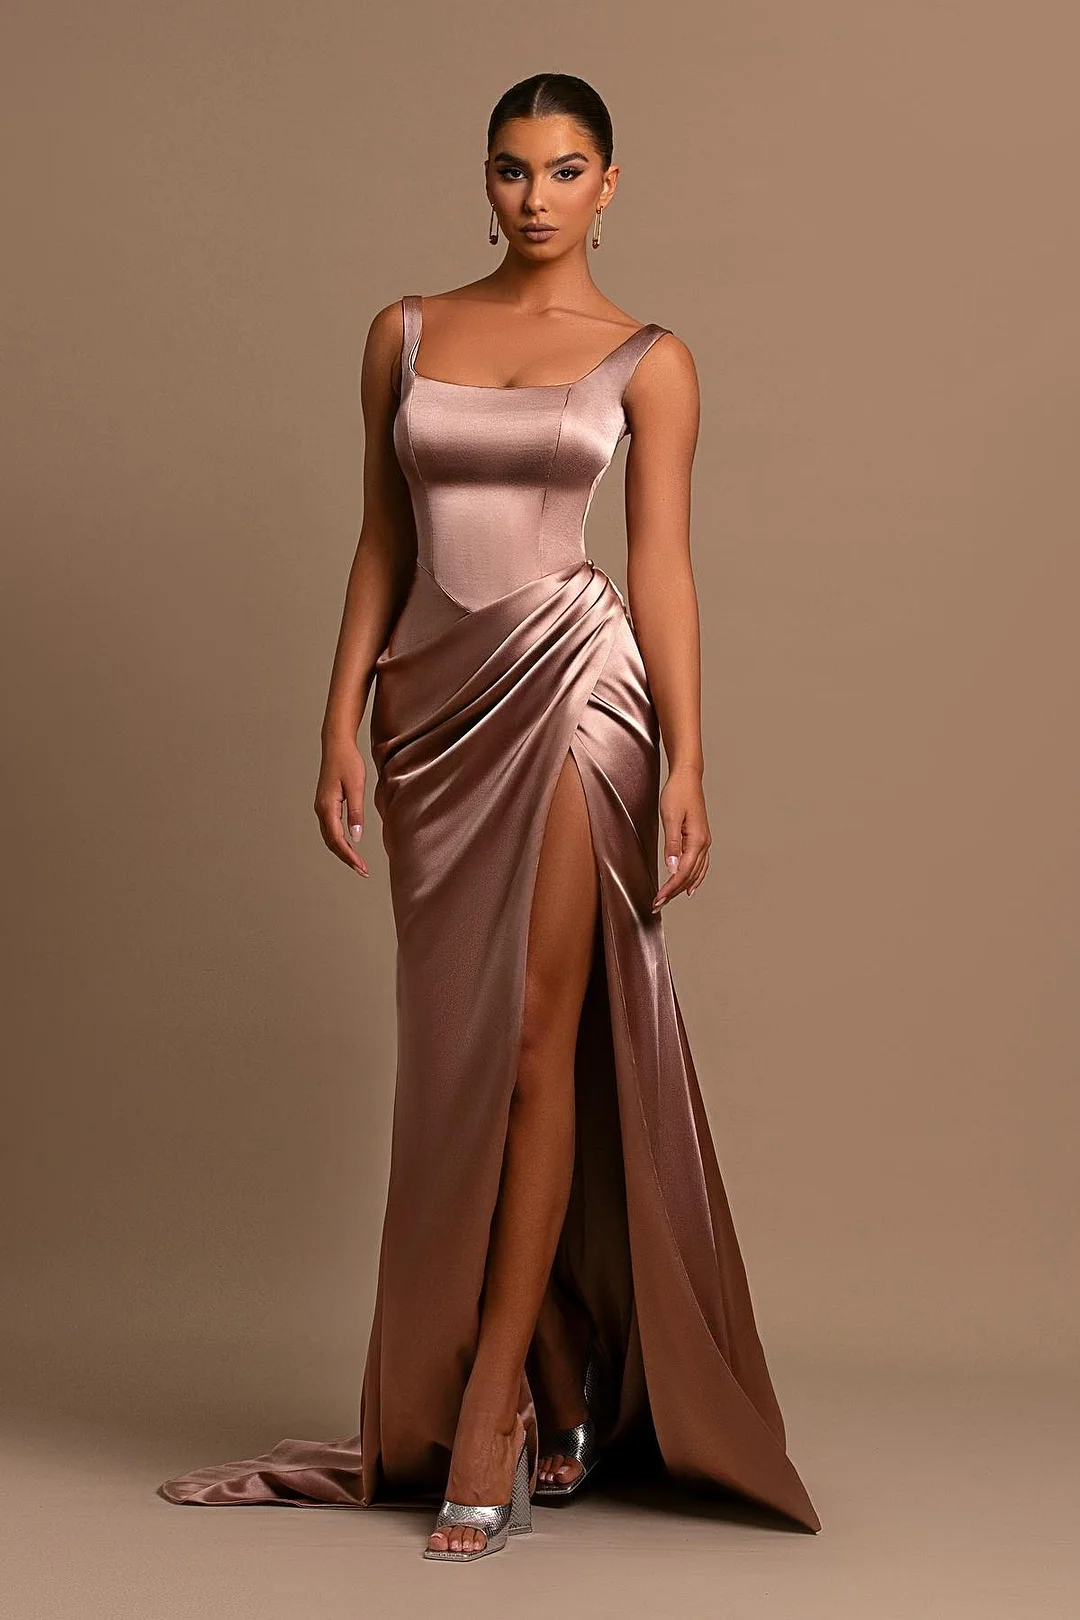 Gorgeous Lotus Root Pink Evening Dress Ball Gown Wide Shoulder Straps Square Neckline Pleated Slit